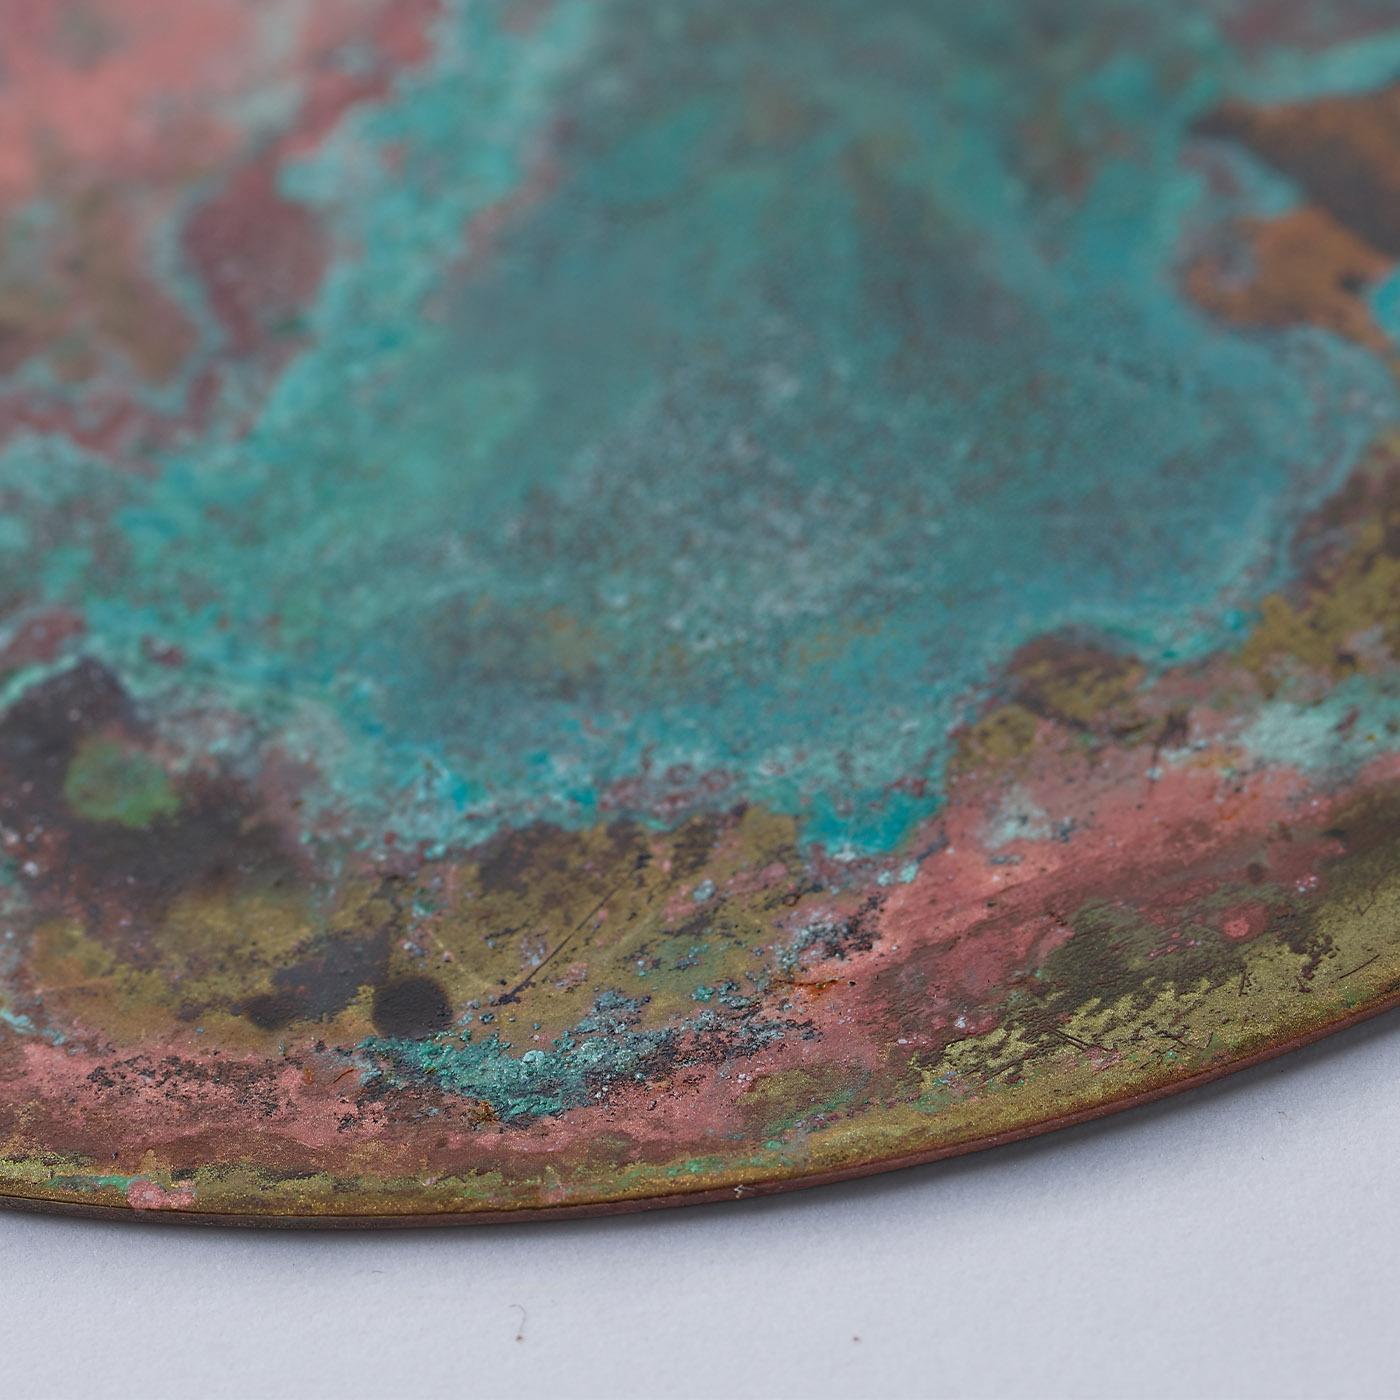 This set of six coasters is distinguished by a vibrant interplay of teal, burgundy, and green clouds accented with a dynamic corroded texture. Fashioned of brass, the pieces get handcrafted step by step, the treatment with acids and oxides lending